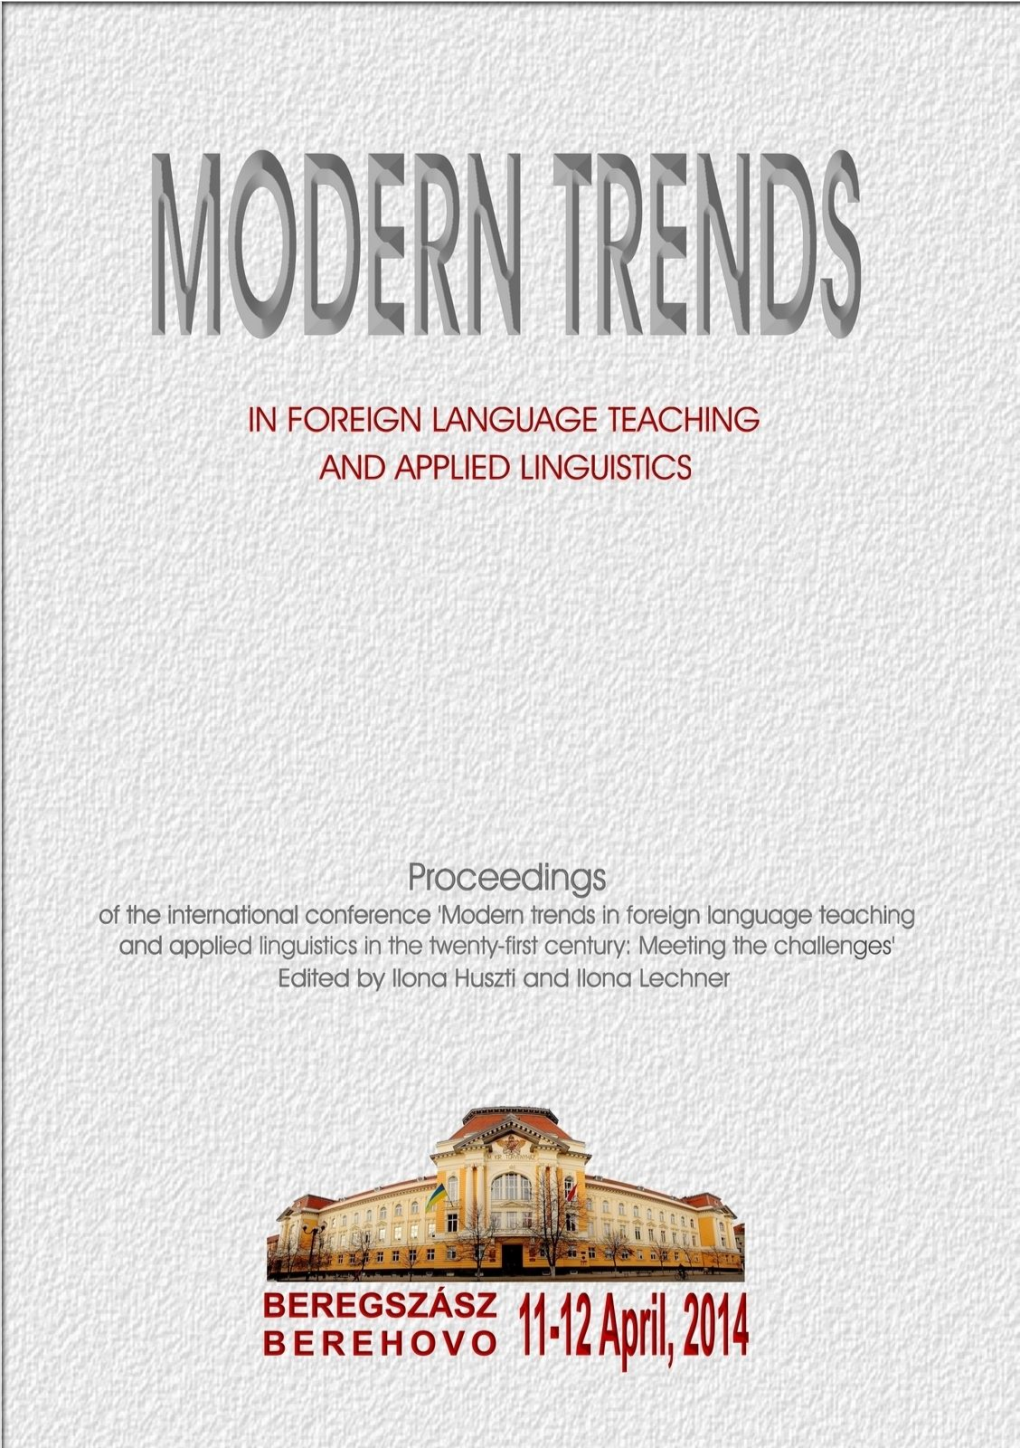 Modern Trends in Foreign Language Teaching and Applied Linguistics in the Twenty-First Century: Meeting the Challenges' Edited by Ilona Huszti and Ilona Lechner